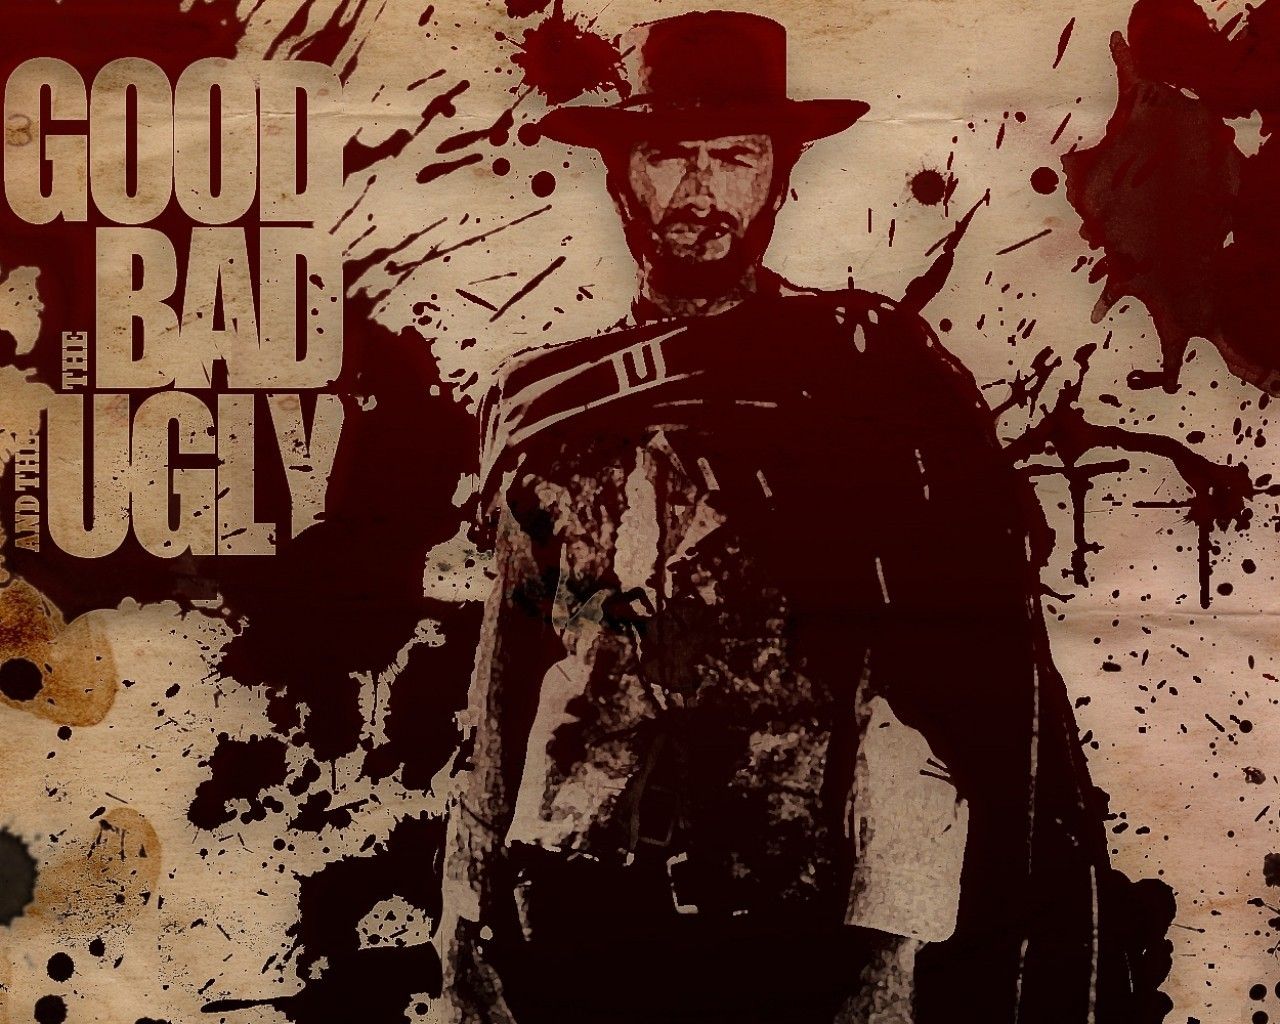 Download 1280x1024 The Good The Bad And The Ugly, Clint Eastwood, Western Movies Wallpaper